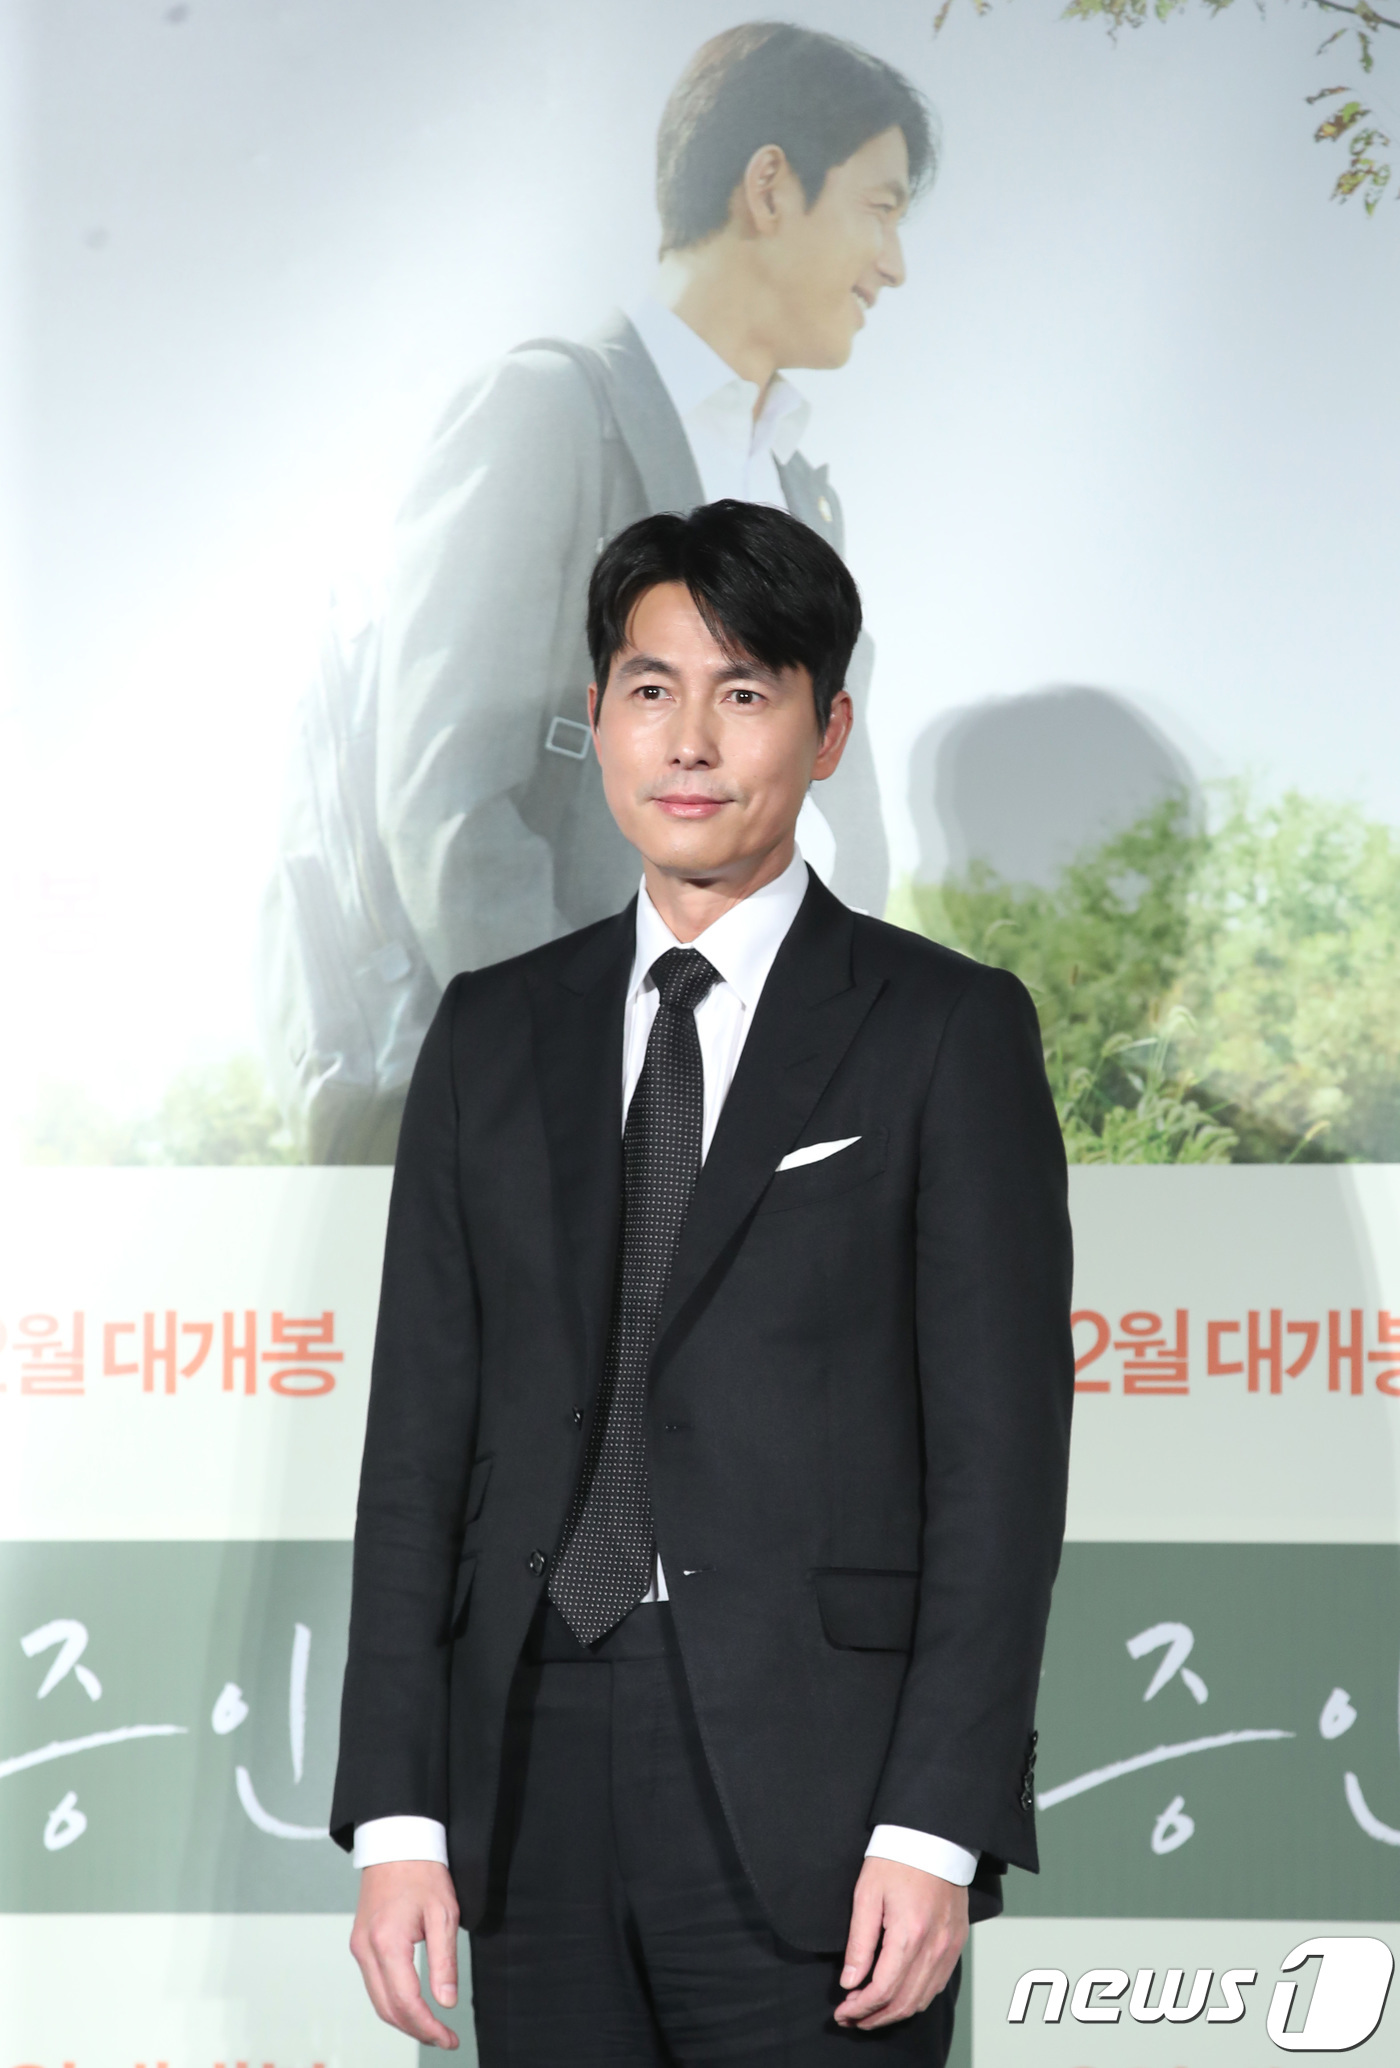 Seoul:) = Actor Jung Woo-sung poses at a production report of the movie Witness (director Lee Han) held at the entrance of Lotte Cinema Counter in Gwangjin-gu, Seoul on the 10th.Witness is a story about a lawyer Sun Ho (Jung Woo-sung), who has to prove the innocence of a possible murder suspect, meeting with autistic girl Ji-woo (Kim Hyang-ki), the only witness on the scene.2019.1.10